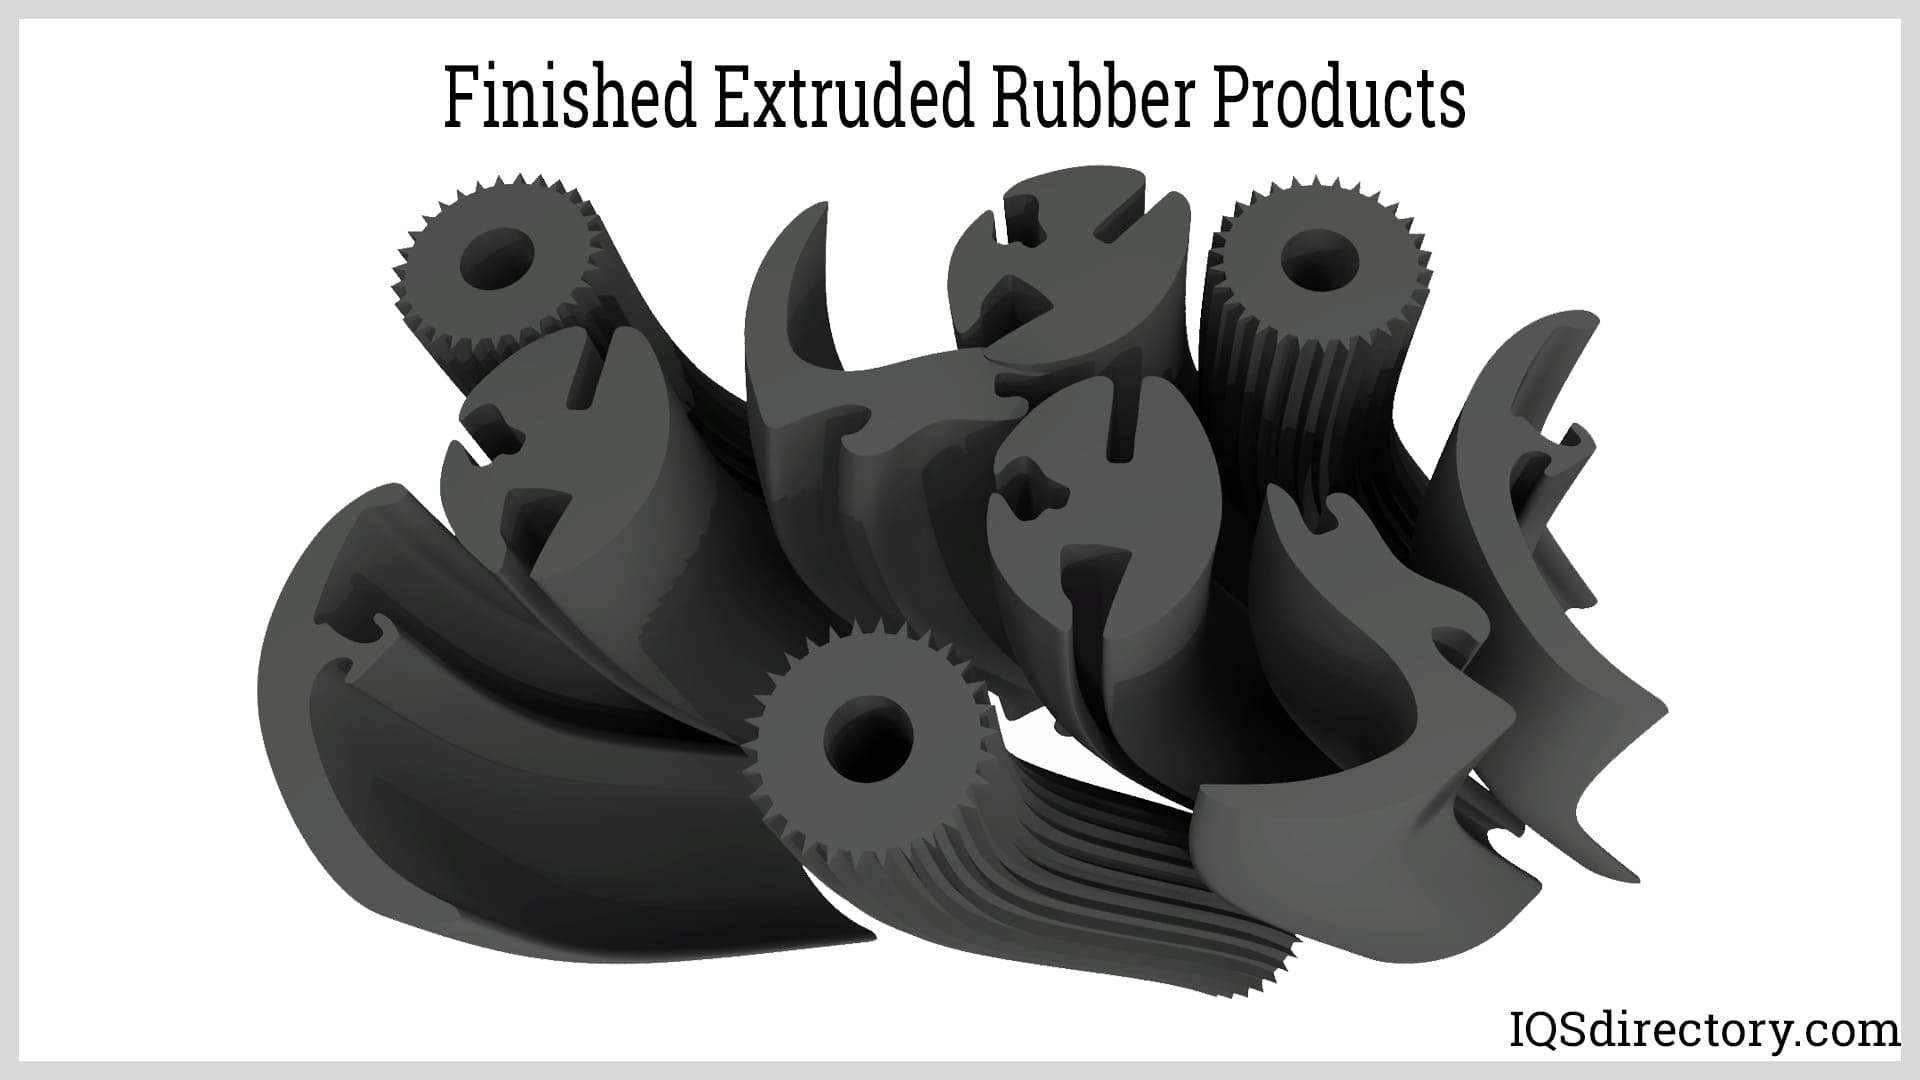 Finished Extruded Rubber Products